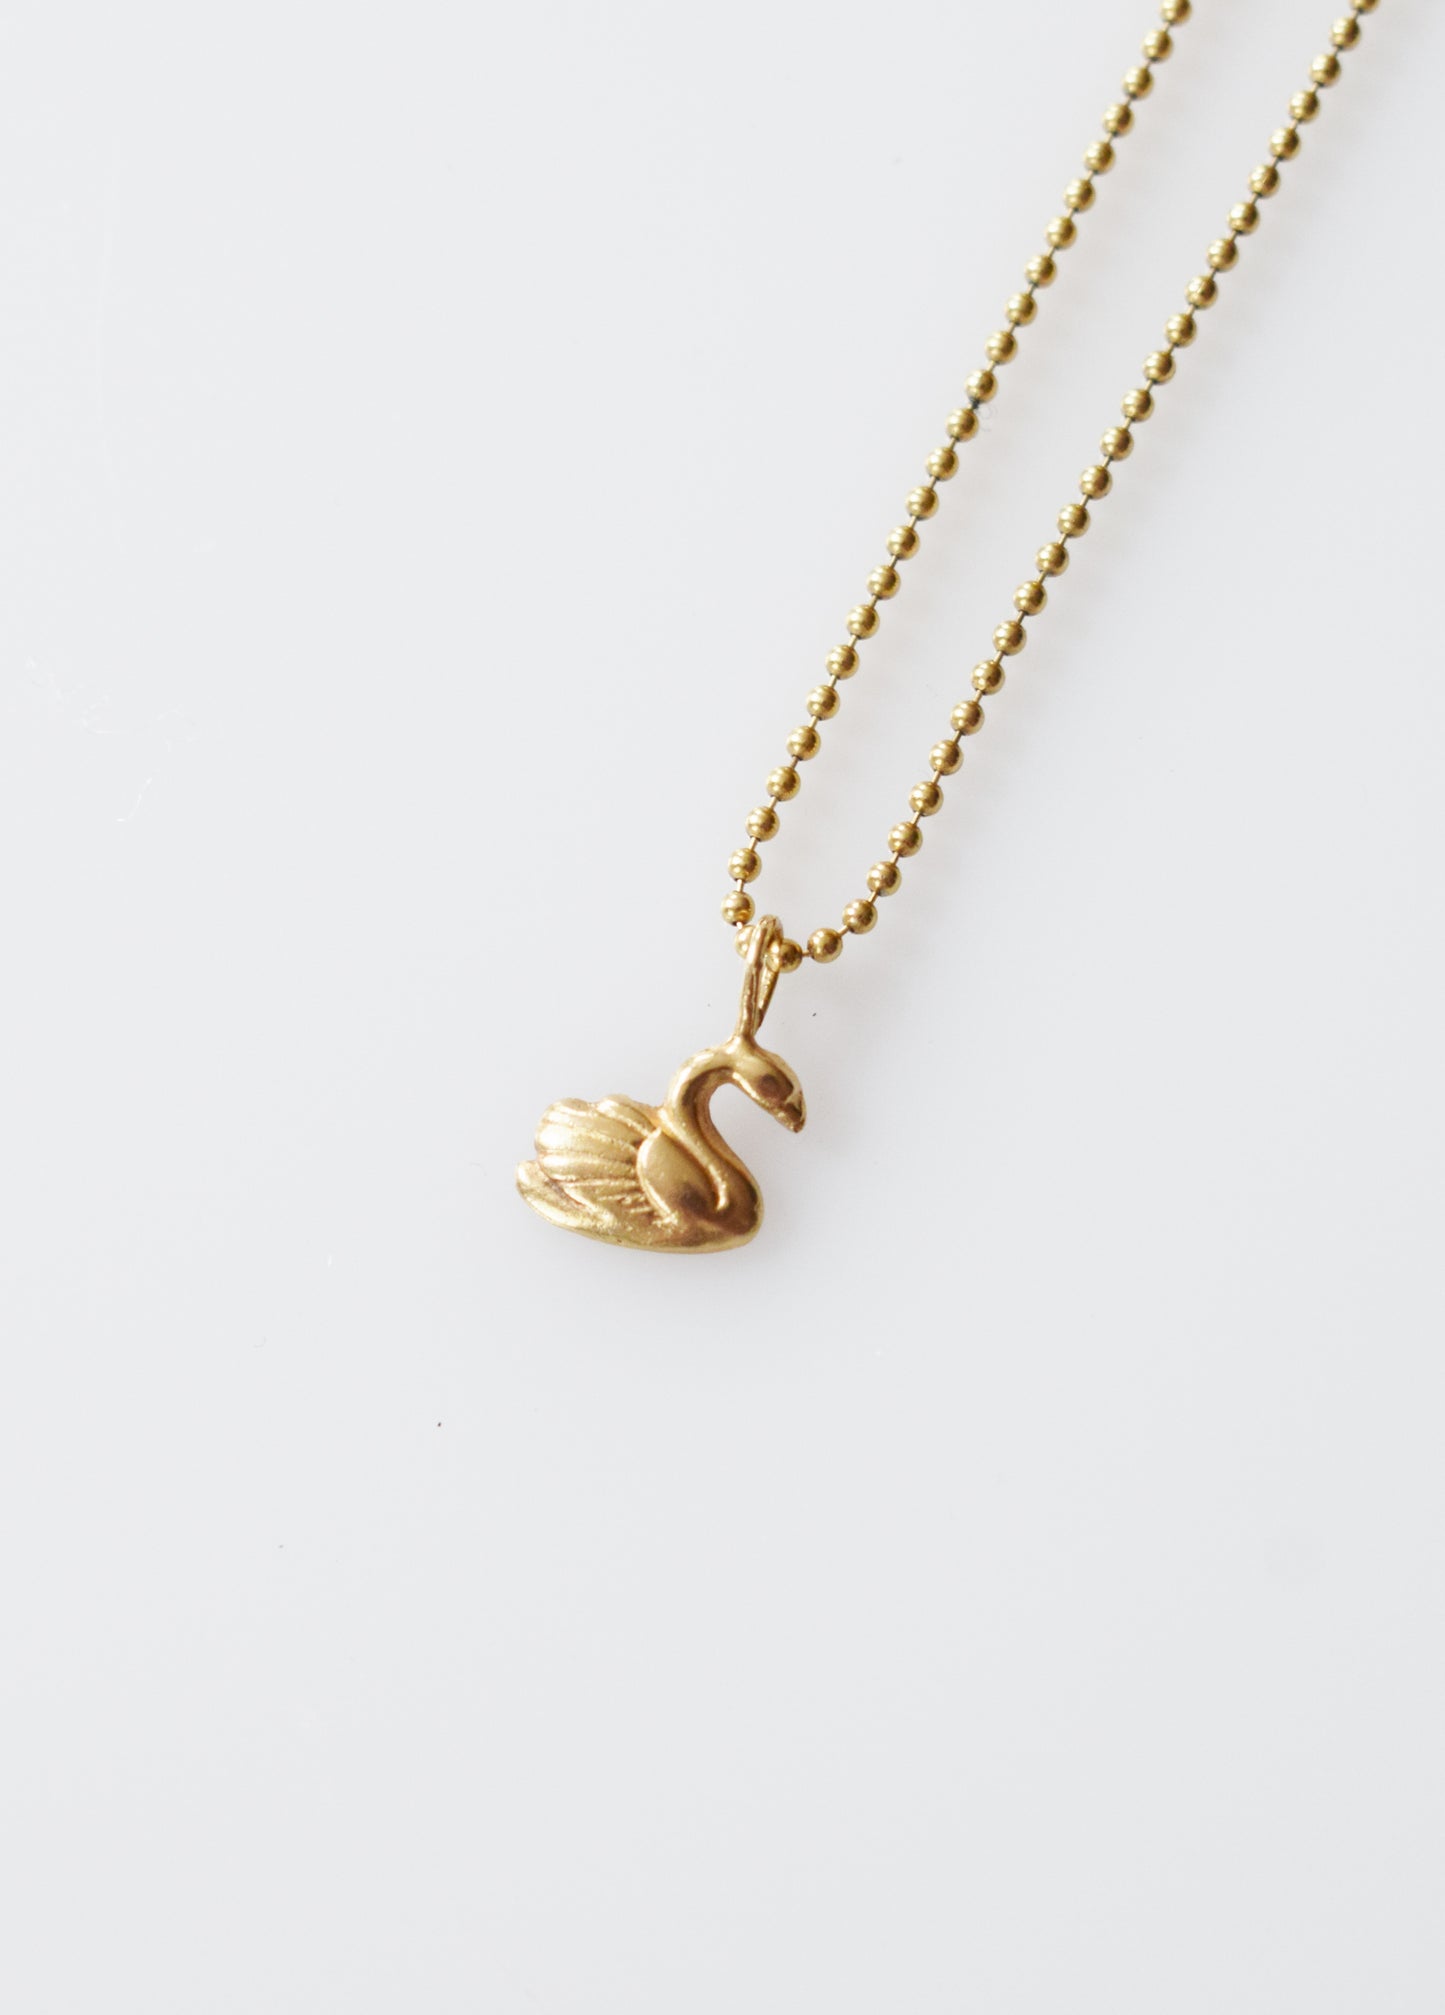 Vintage 10k Gold Swan Charm on Chain